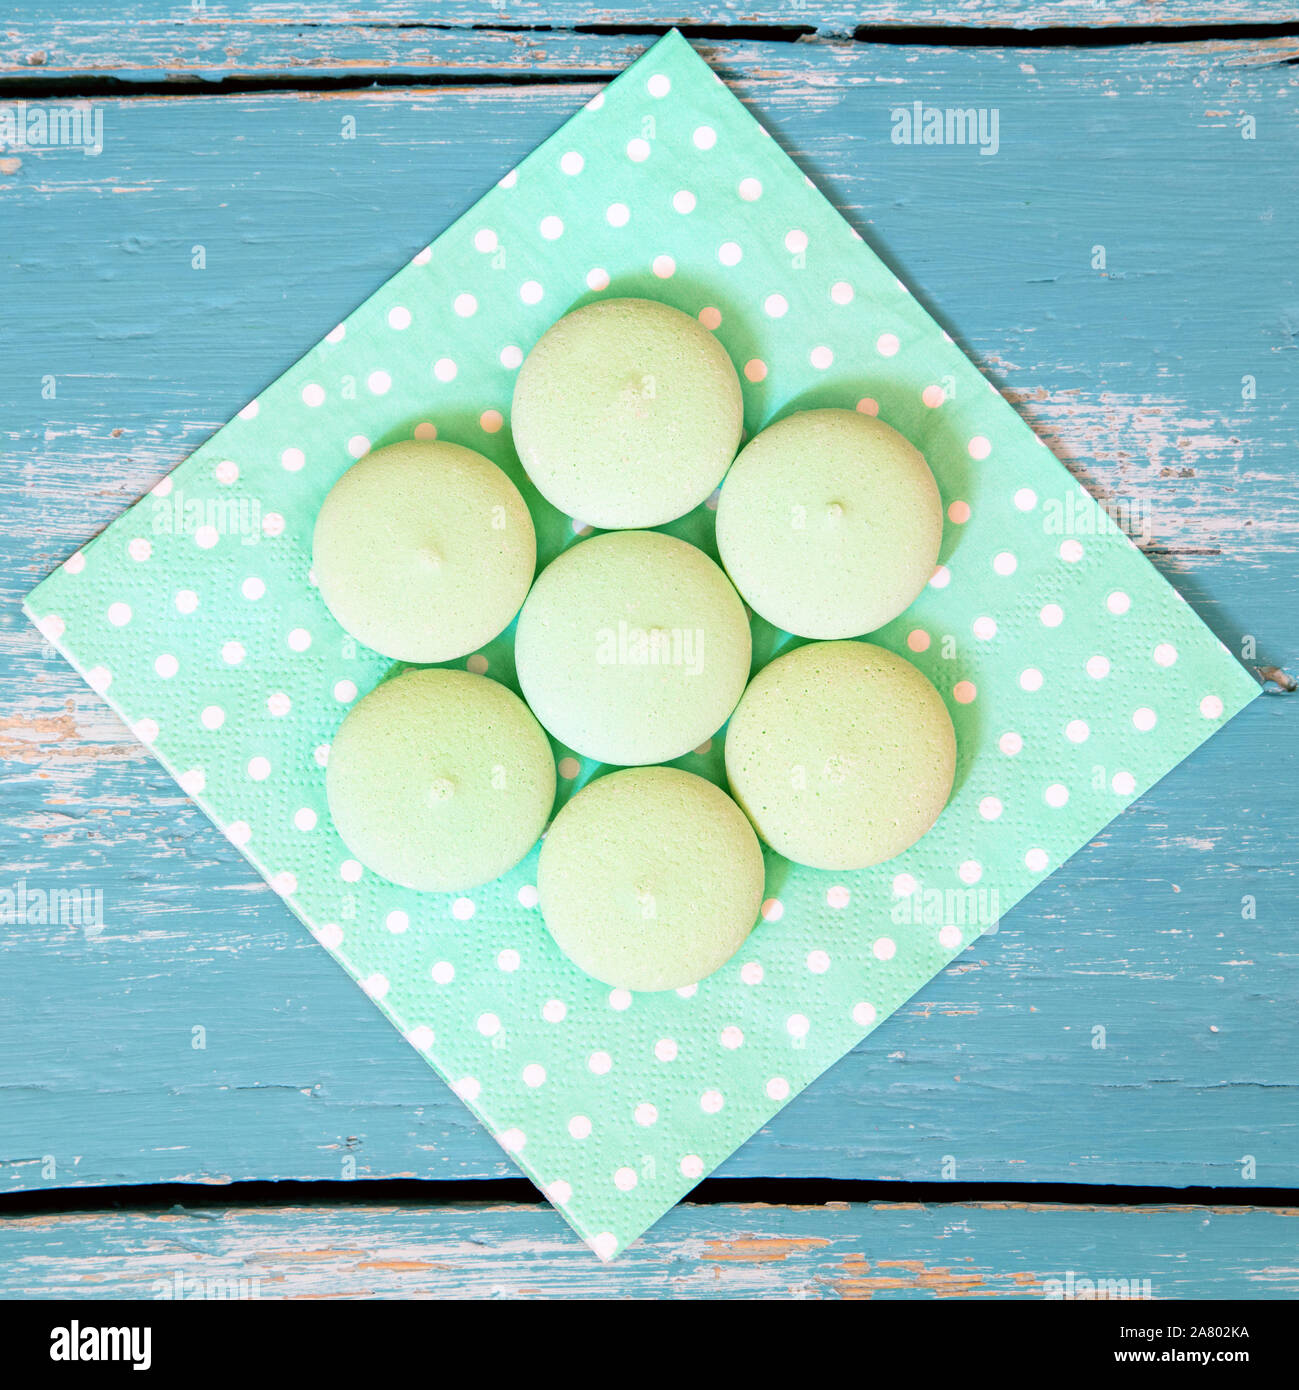 square of green biscuits or cookies on a dotted napkin, blue wooden background Stock Photo